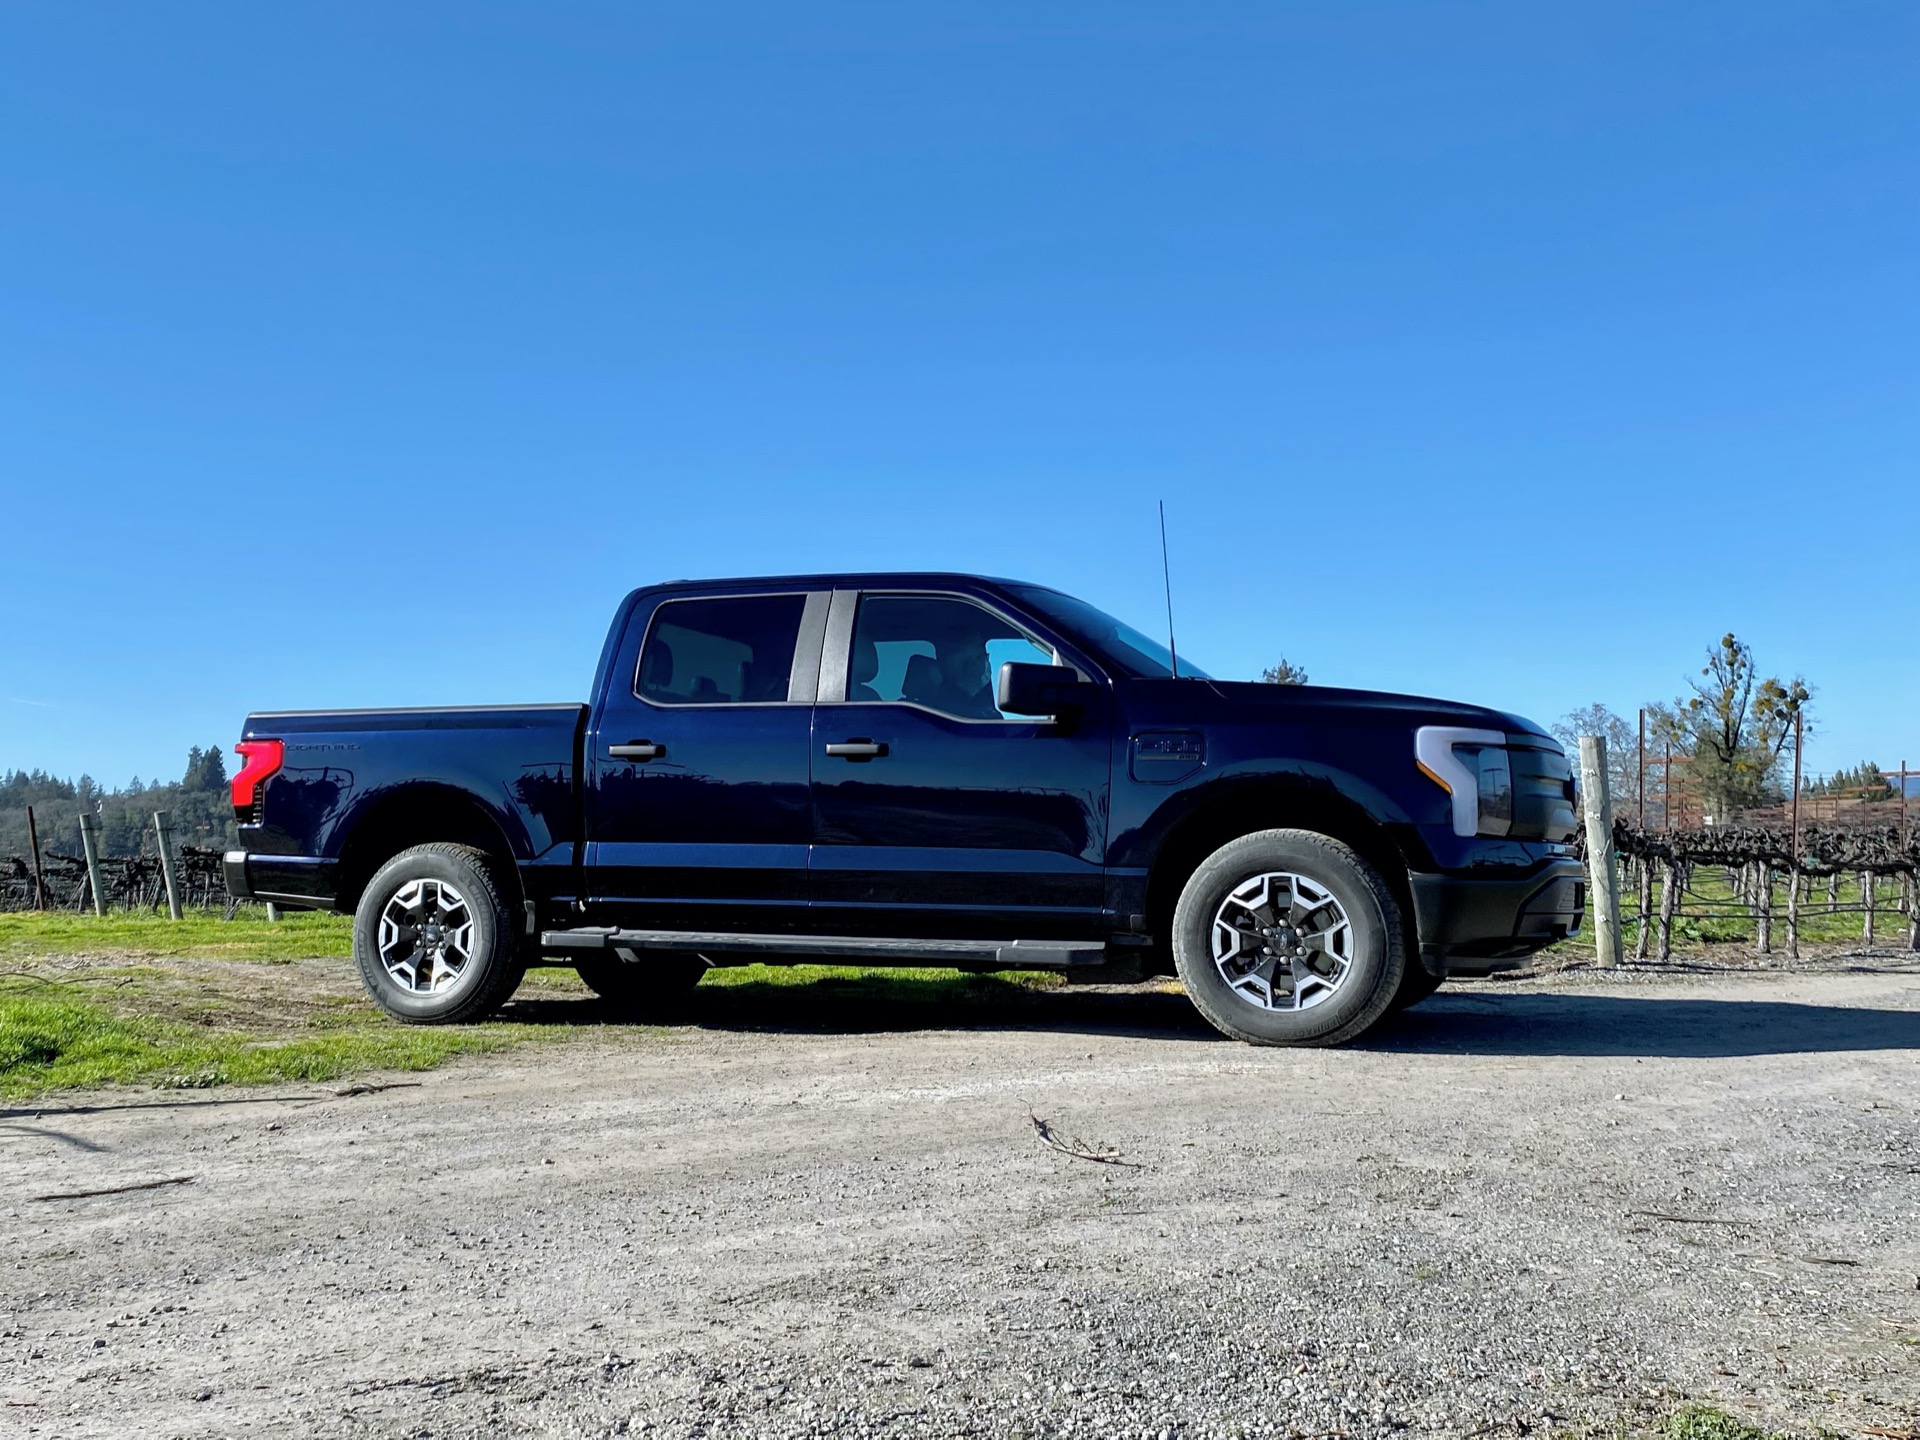 First ride: 2022 Ford F-150 Lightning adds finesse to America’s bestselling truckFirst ride: 2022 Ford F-150 Lightning adds finesse to America’s bestselling truck